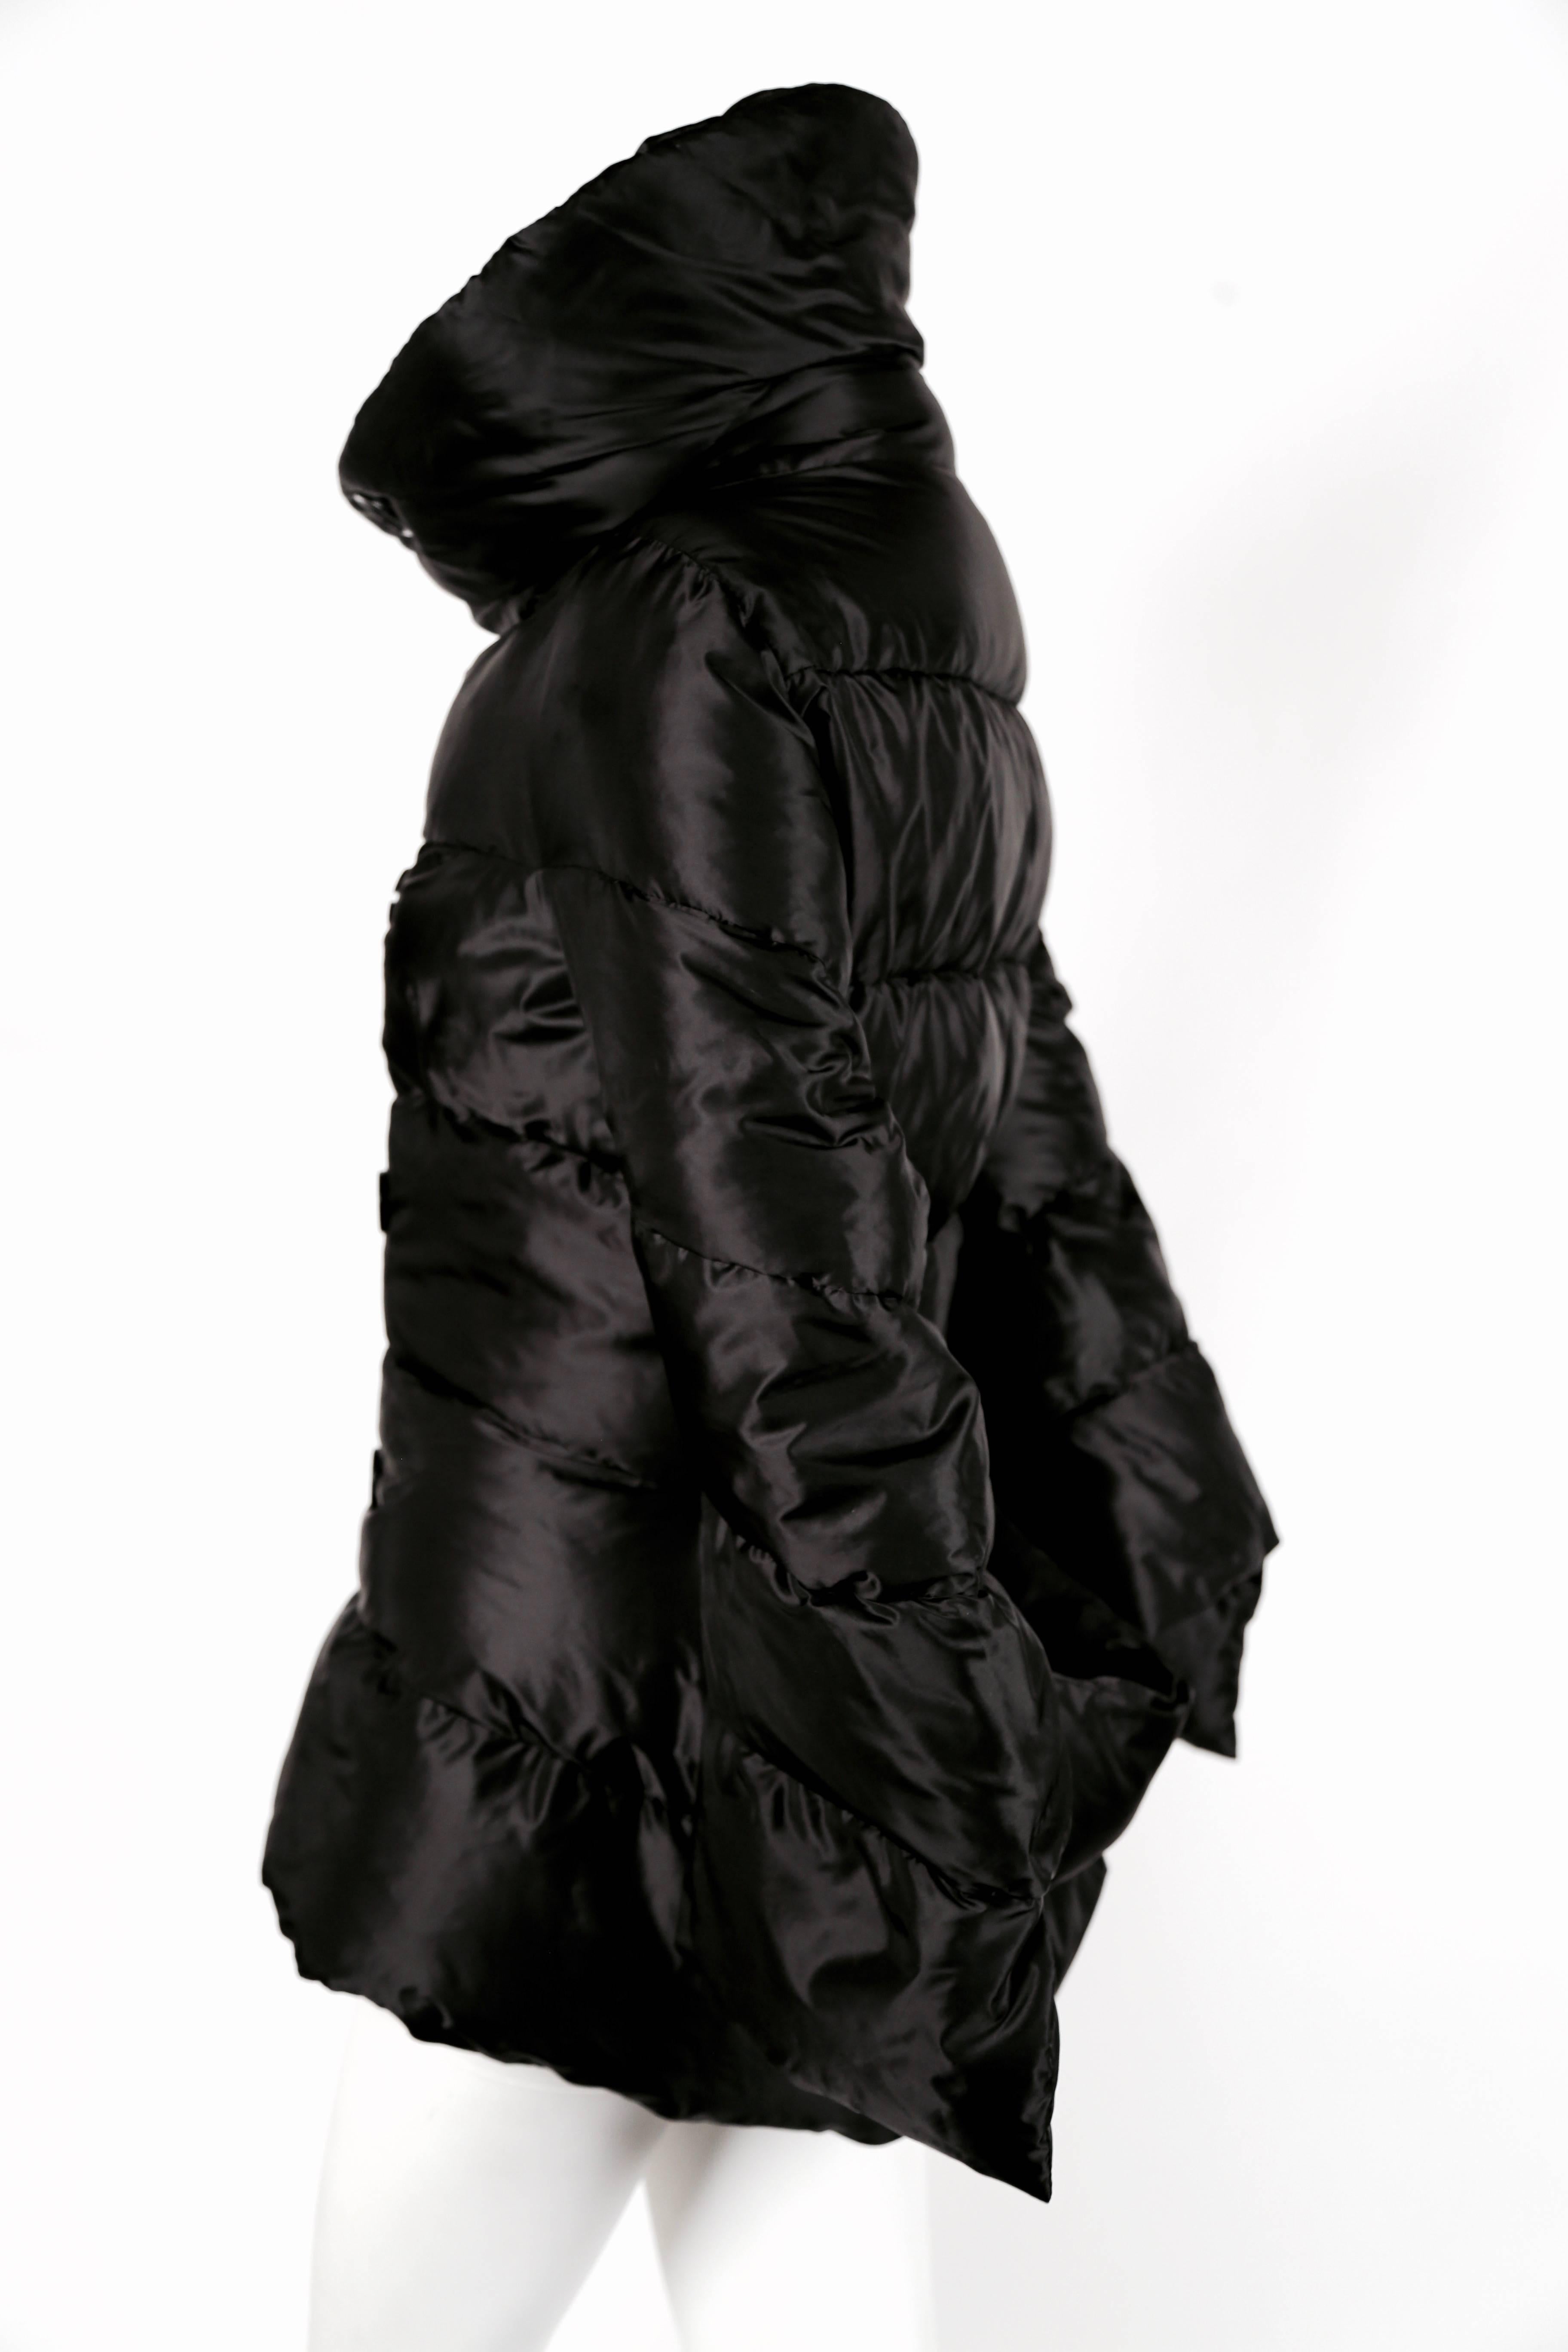 Black Junya Watanabe for Comme des Garcons padded runway coat with bustle, 2009 